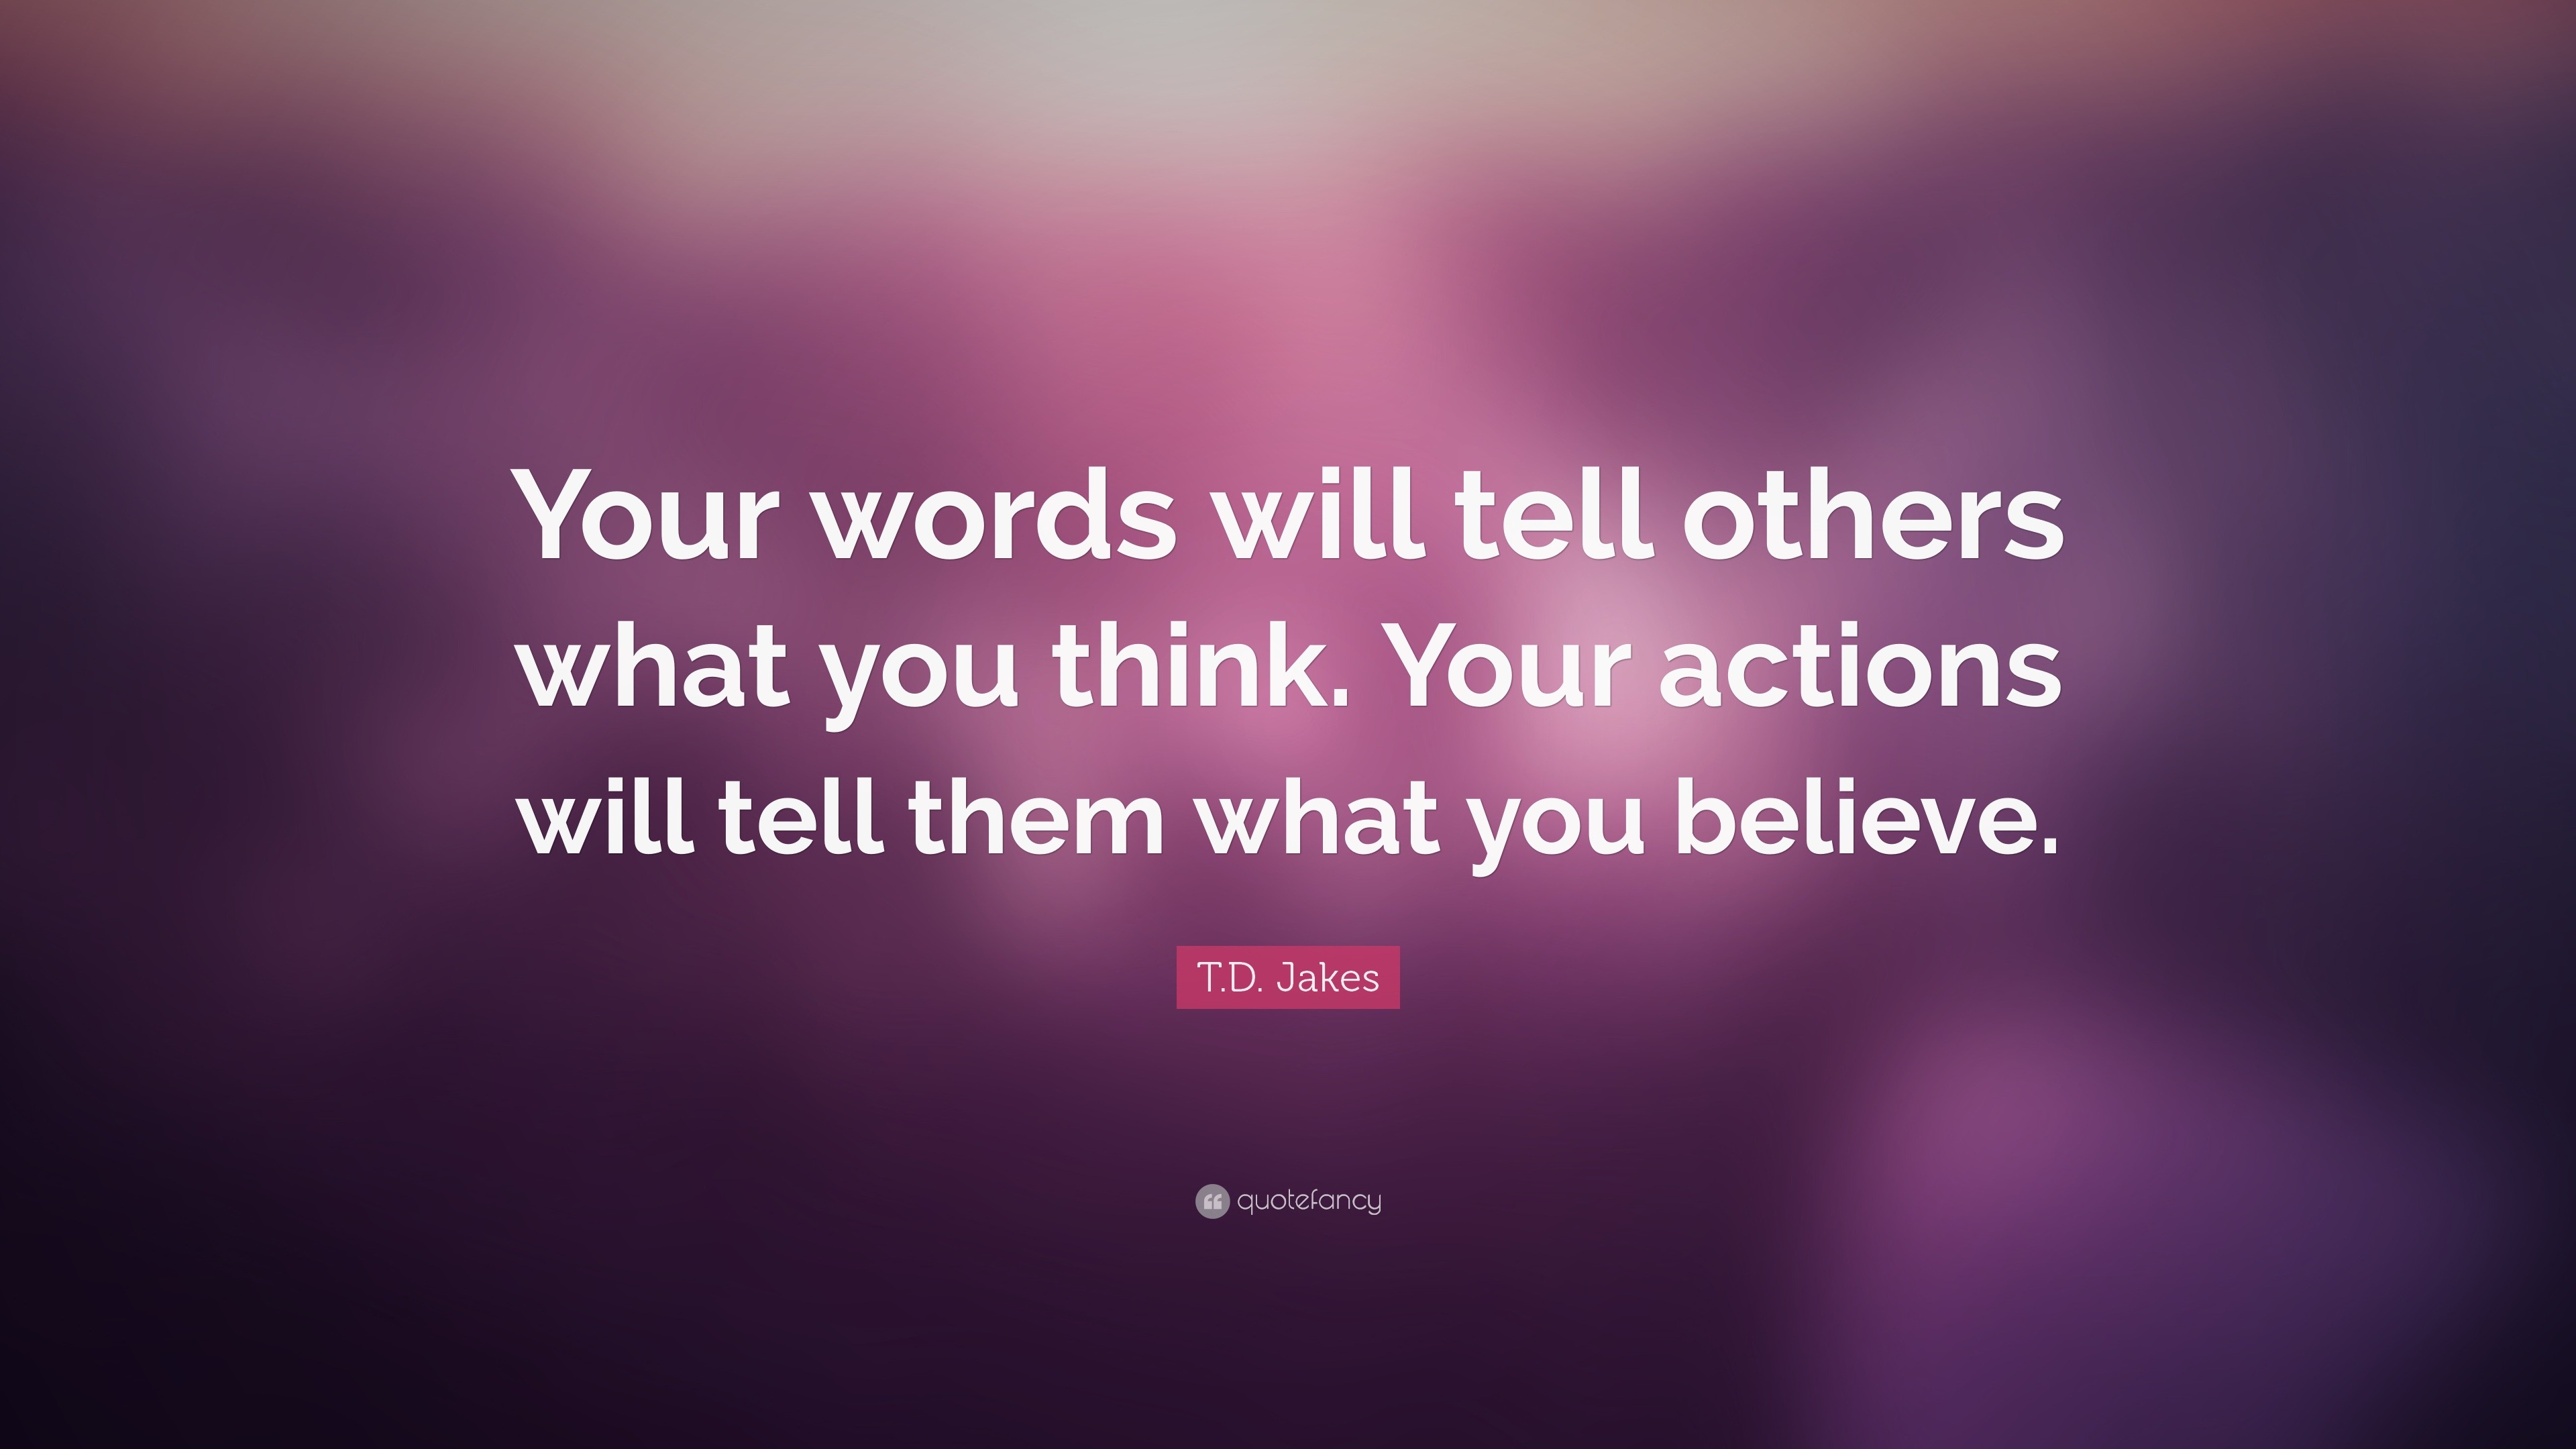 T.D. Jakes Quote: “Your words will tell others what you think. Your